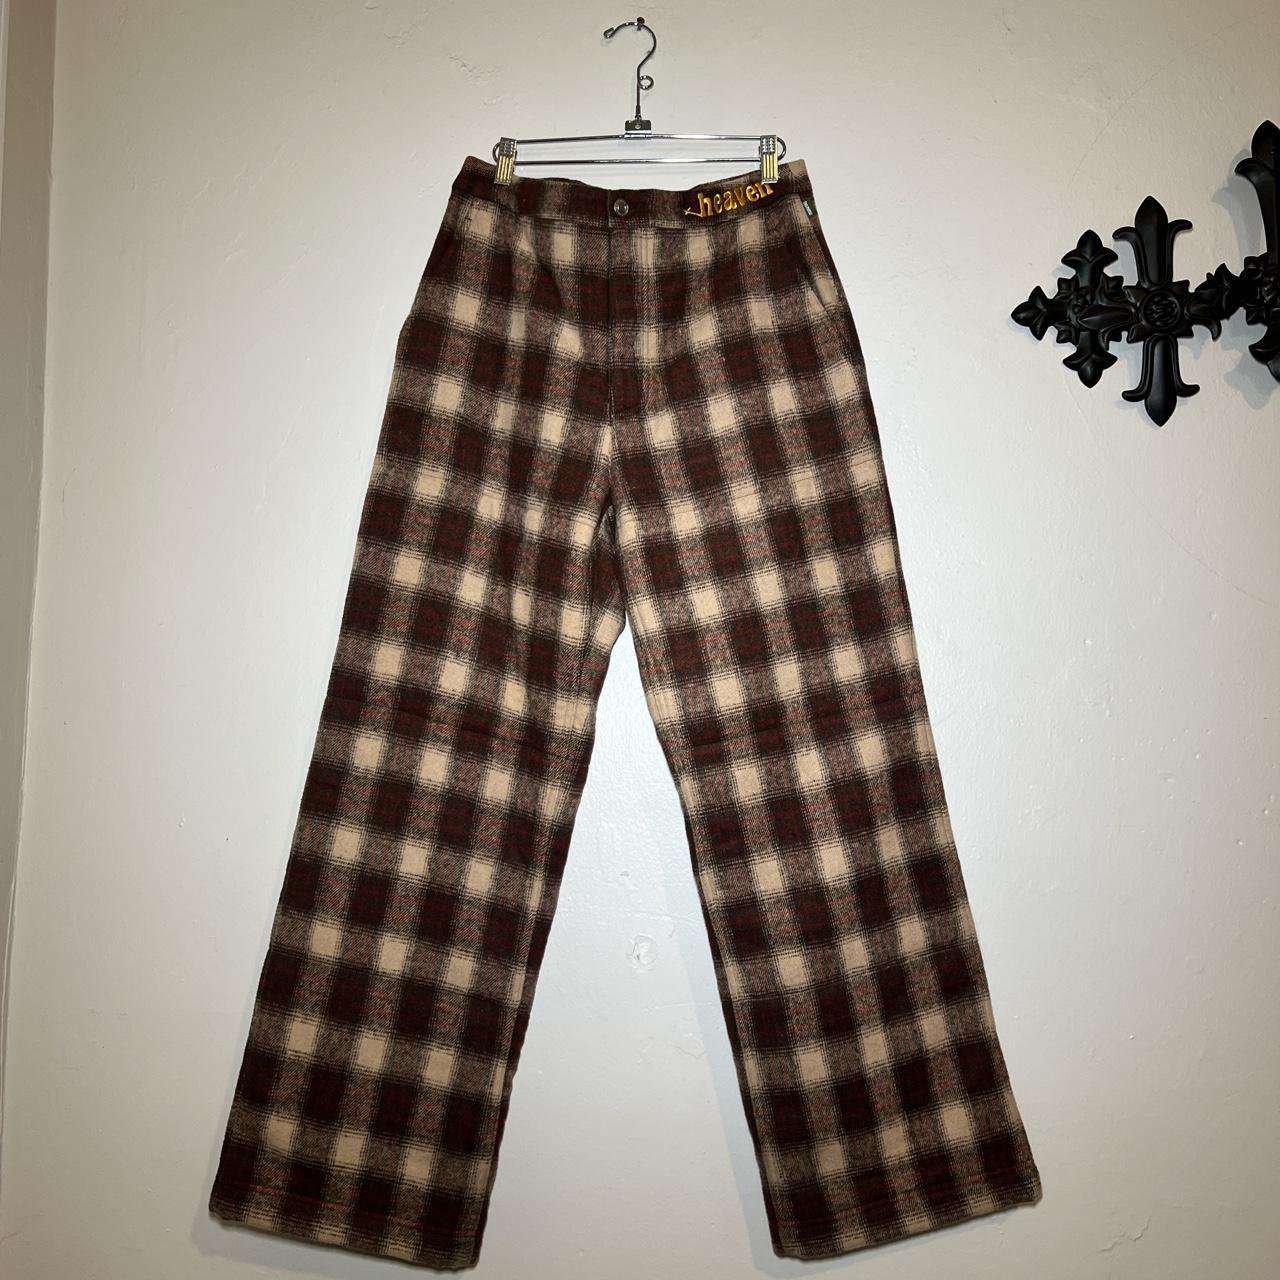 Heaven by Marc Jacobs Men's Brown and Cream Trousers | Depop